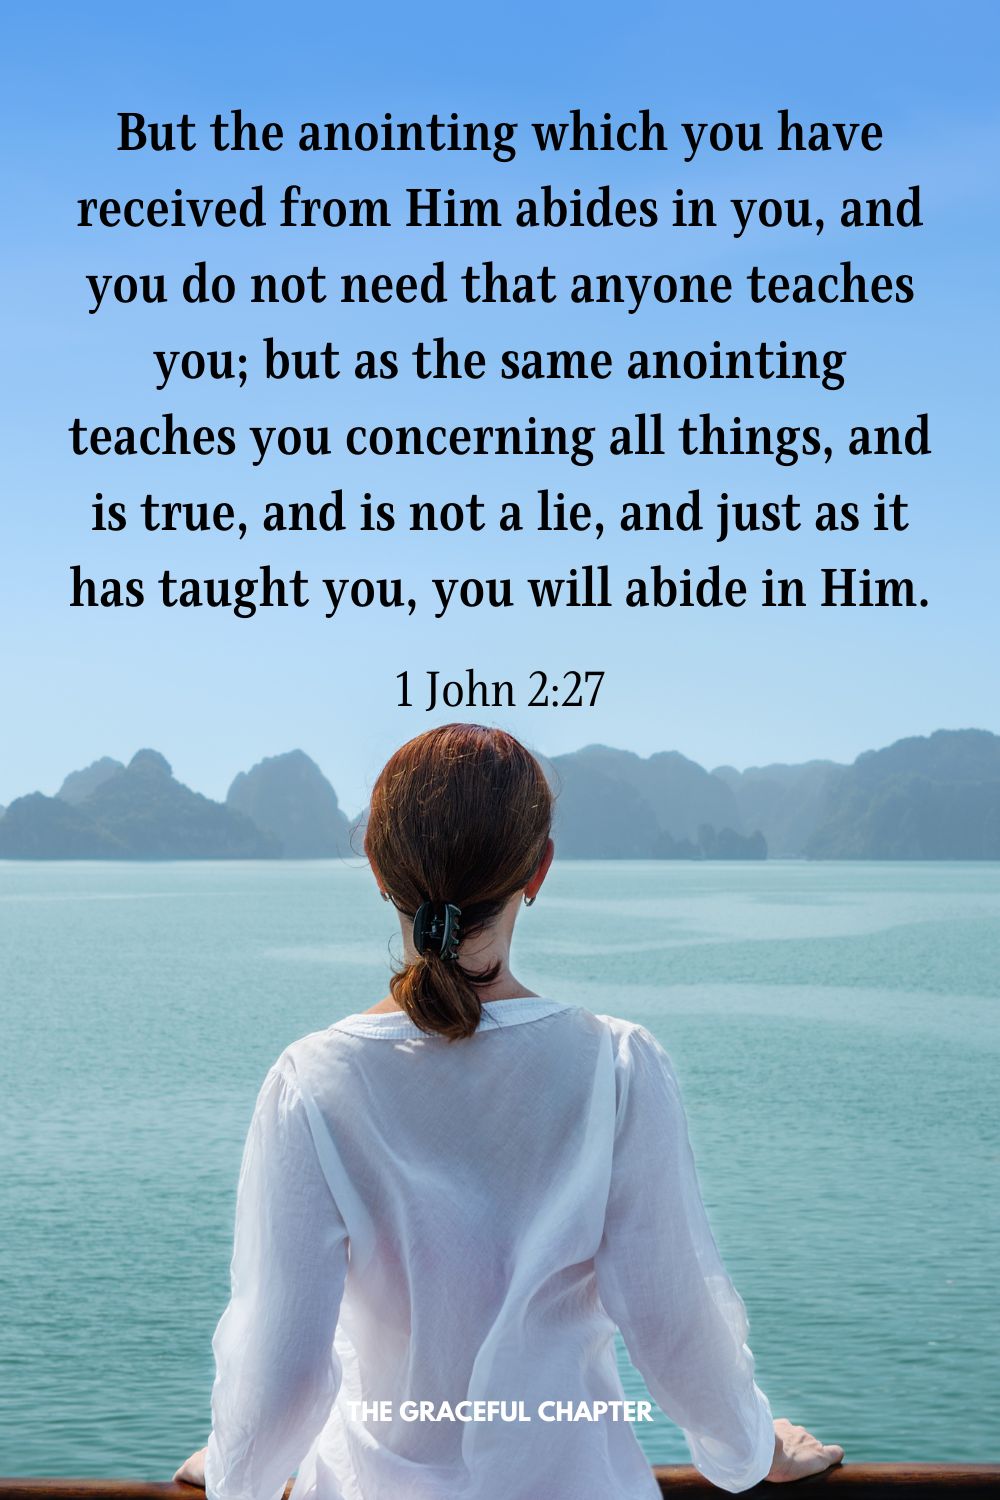 But the anointing which you have received from Him abides in you, and you do not need that anyone teaches you; but as the same anointing teaches you concerning all things, and is true, and is not a lie, and just as it has taught you, you will abide in Him. 1 John 2:27